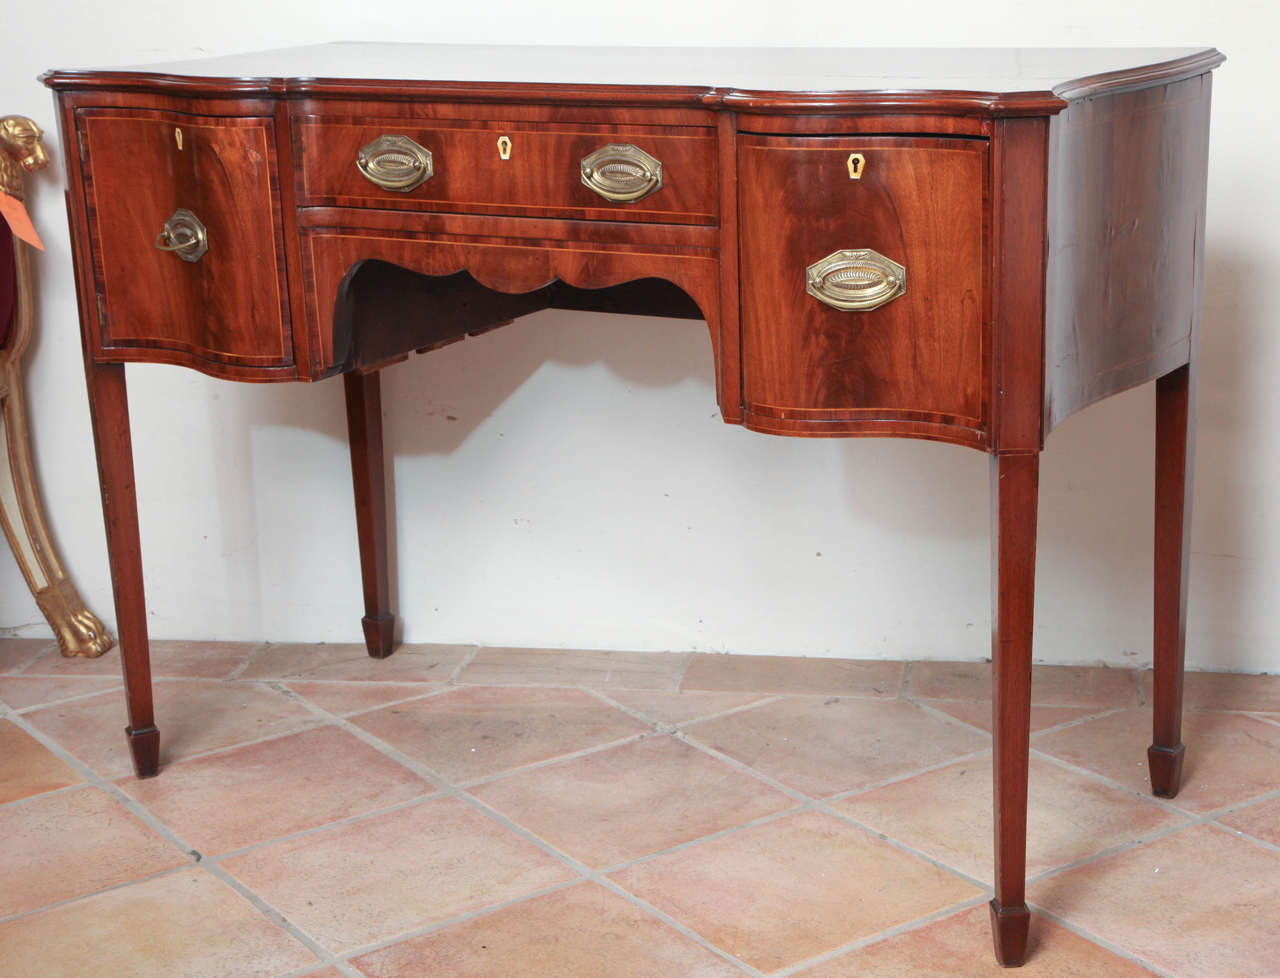 A George III mahogany small-scale serpentine front sideboard fitted with a long central drawer flanked by a cabinet and deep bottle drawer and with crossbanding and stringing throughout.